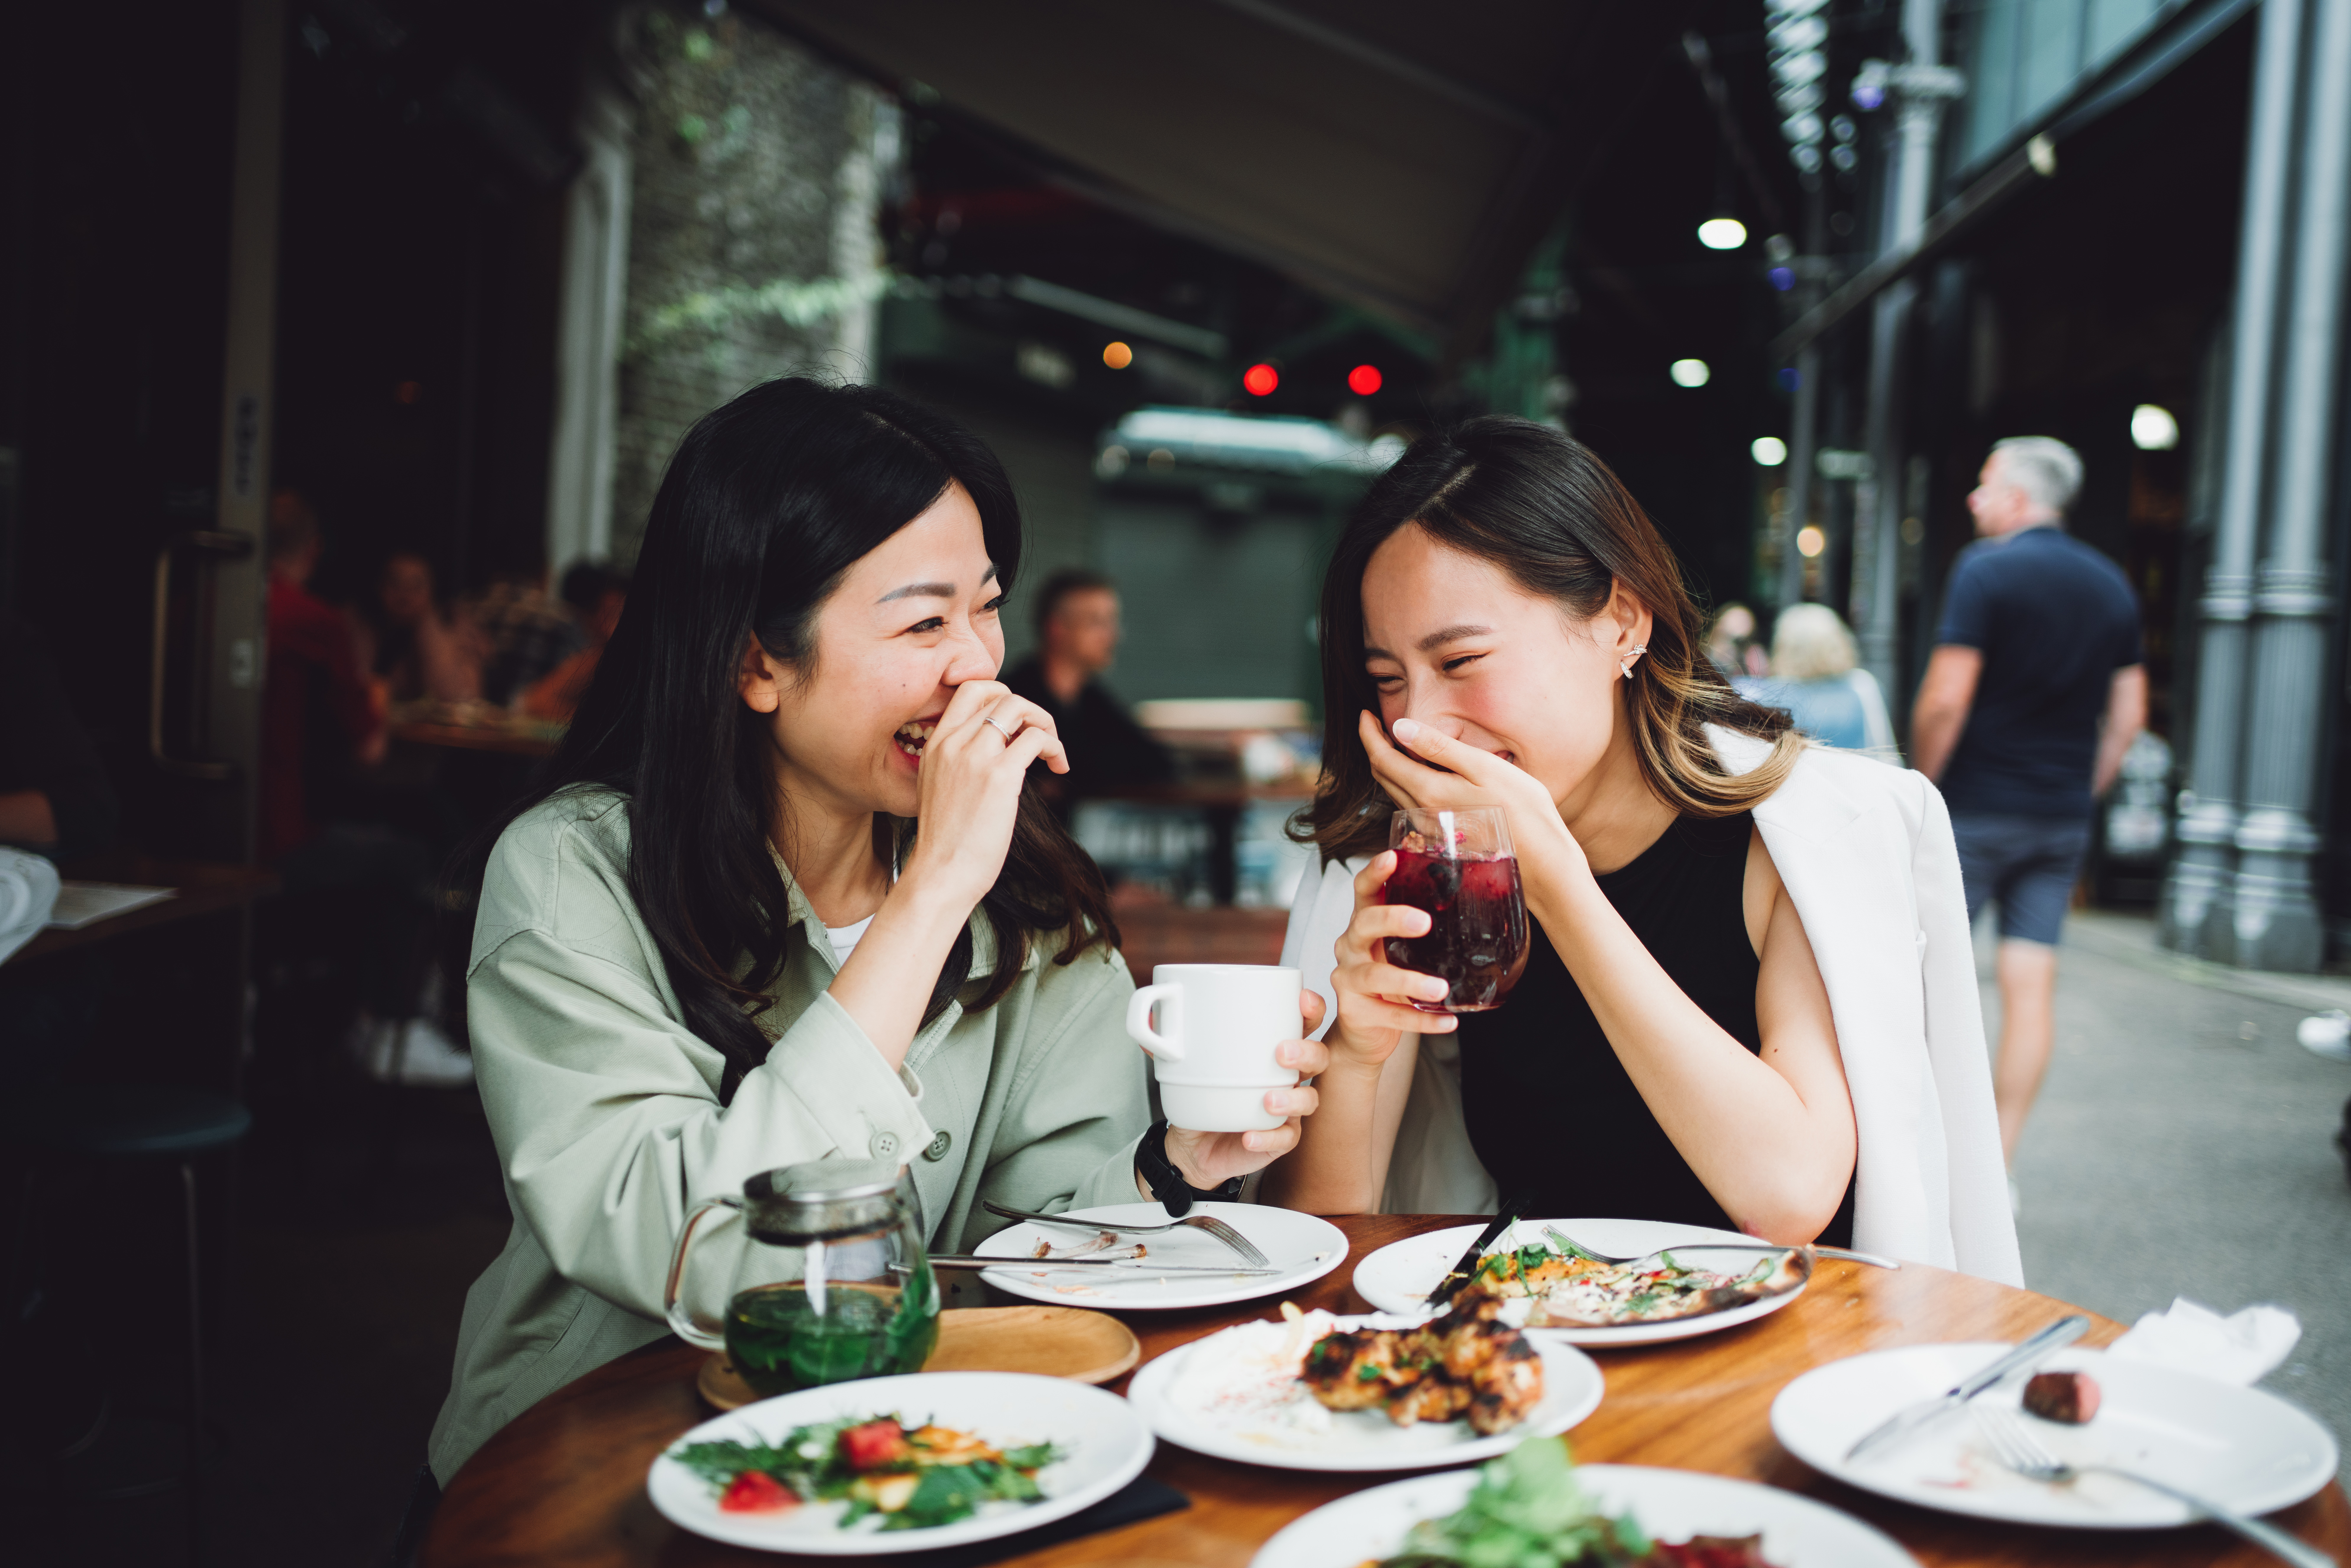 Two Women Laughing Over Wine and Food at Restaurant